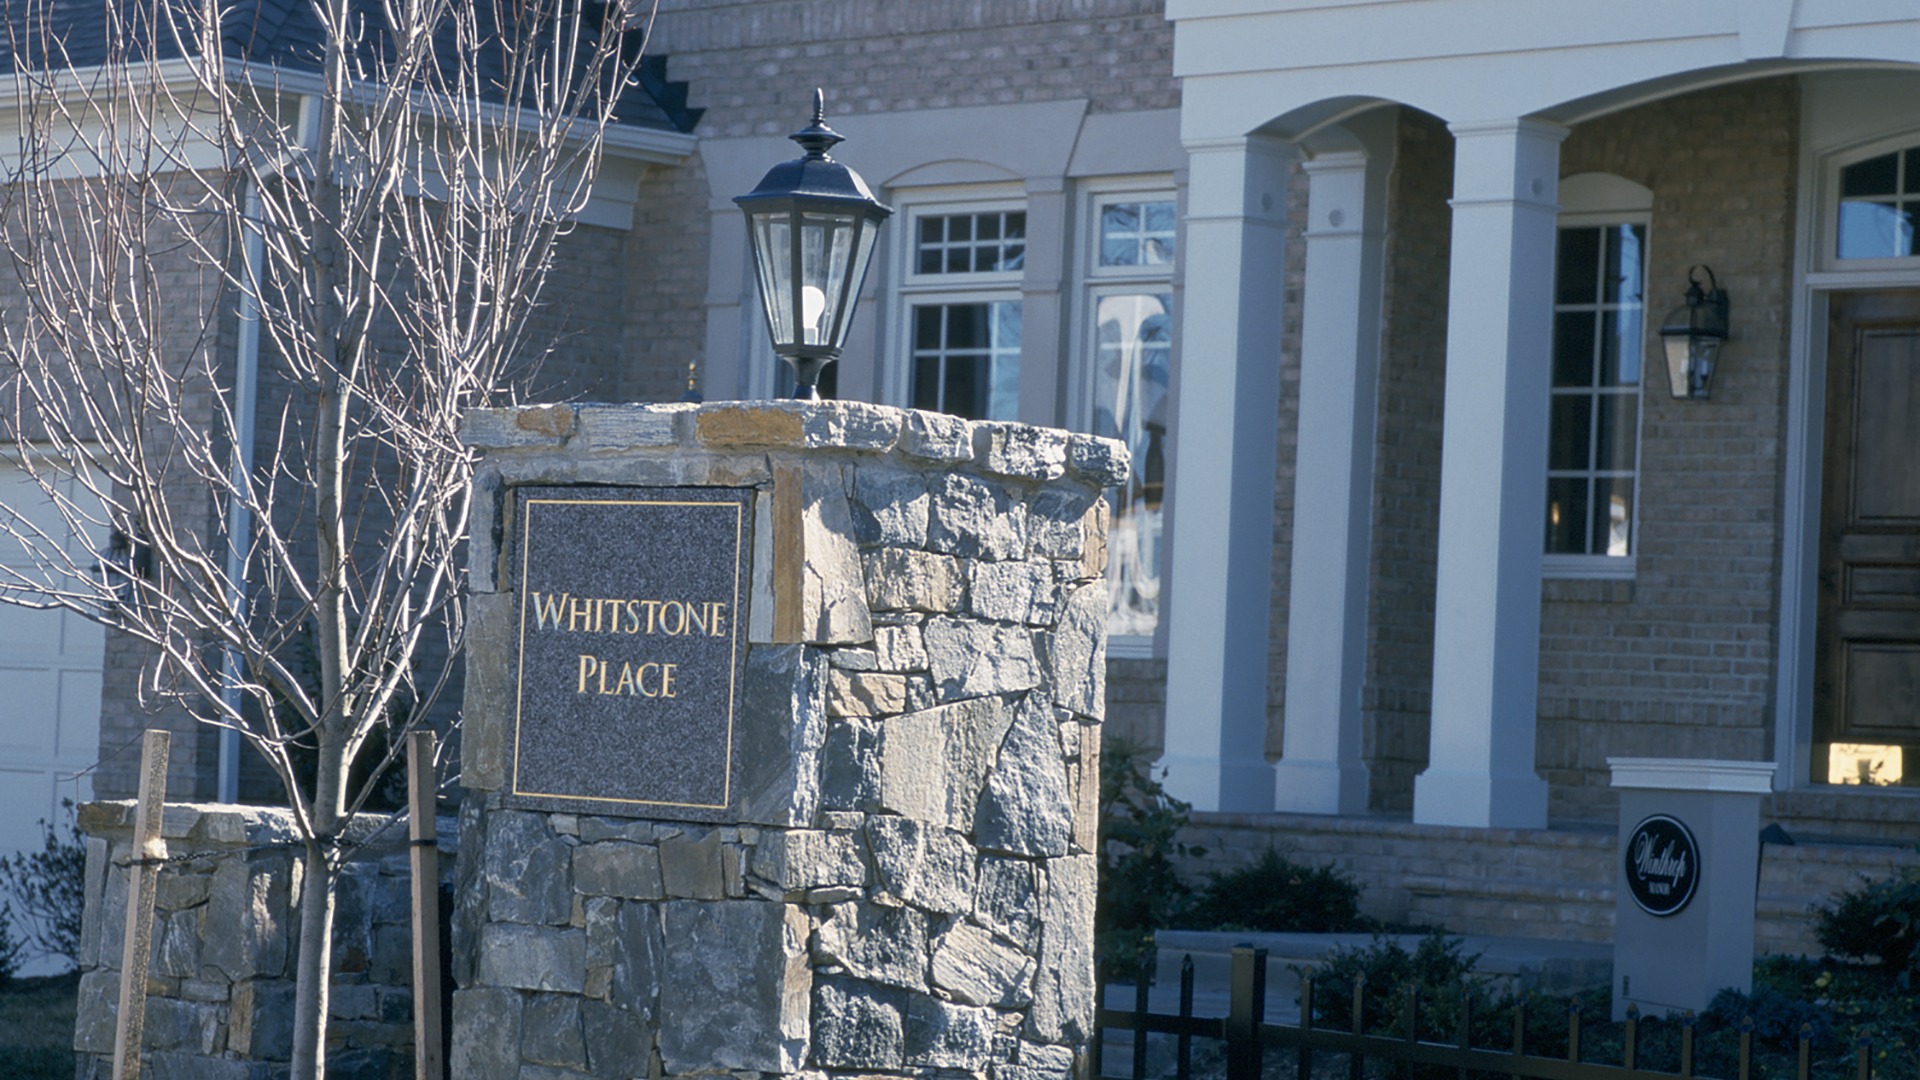 On each home at One Cameron Place was a stone monument, creating an elegant themescape.